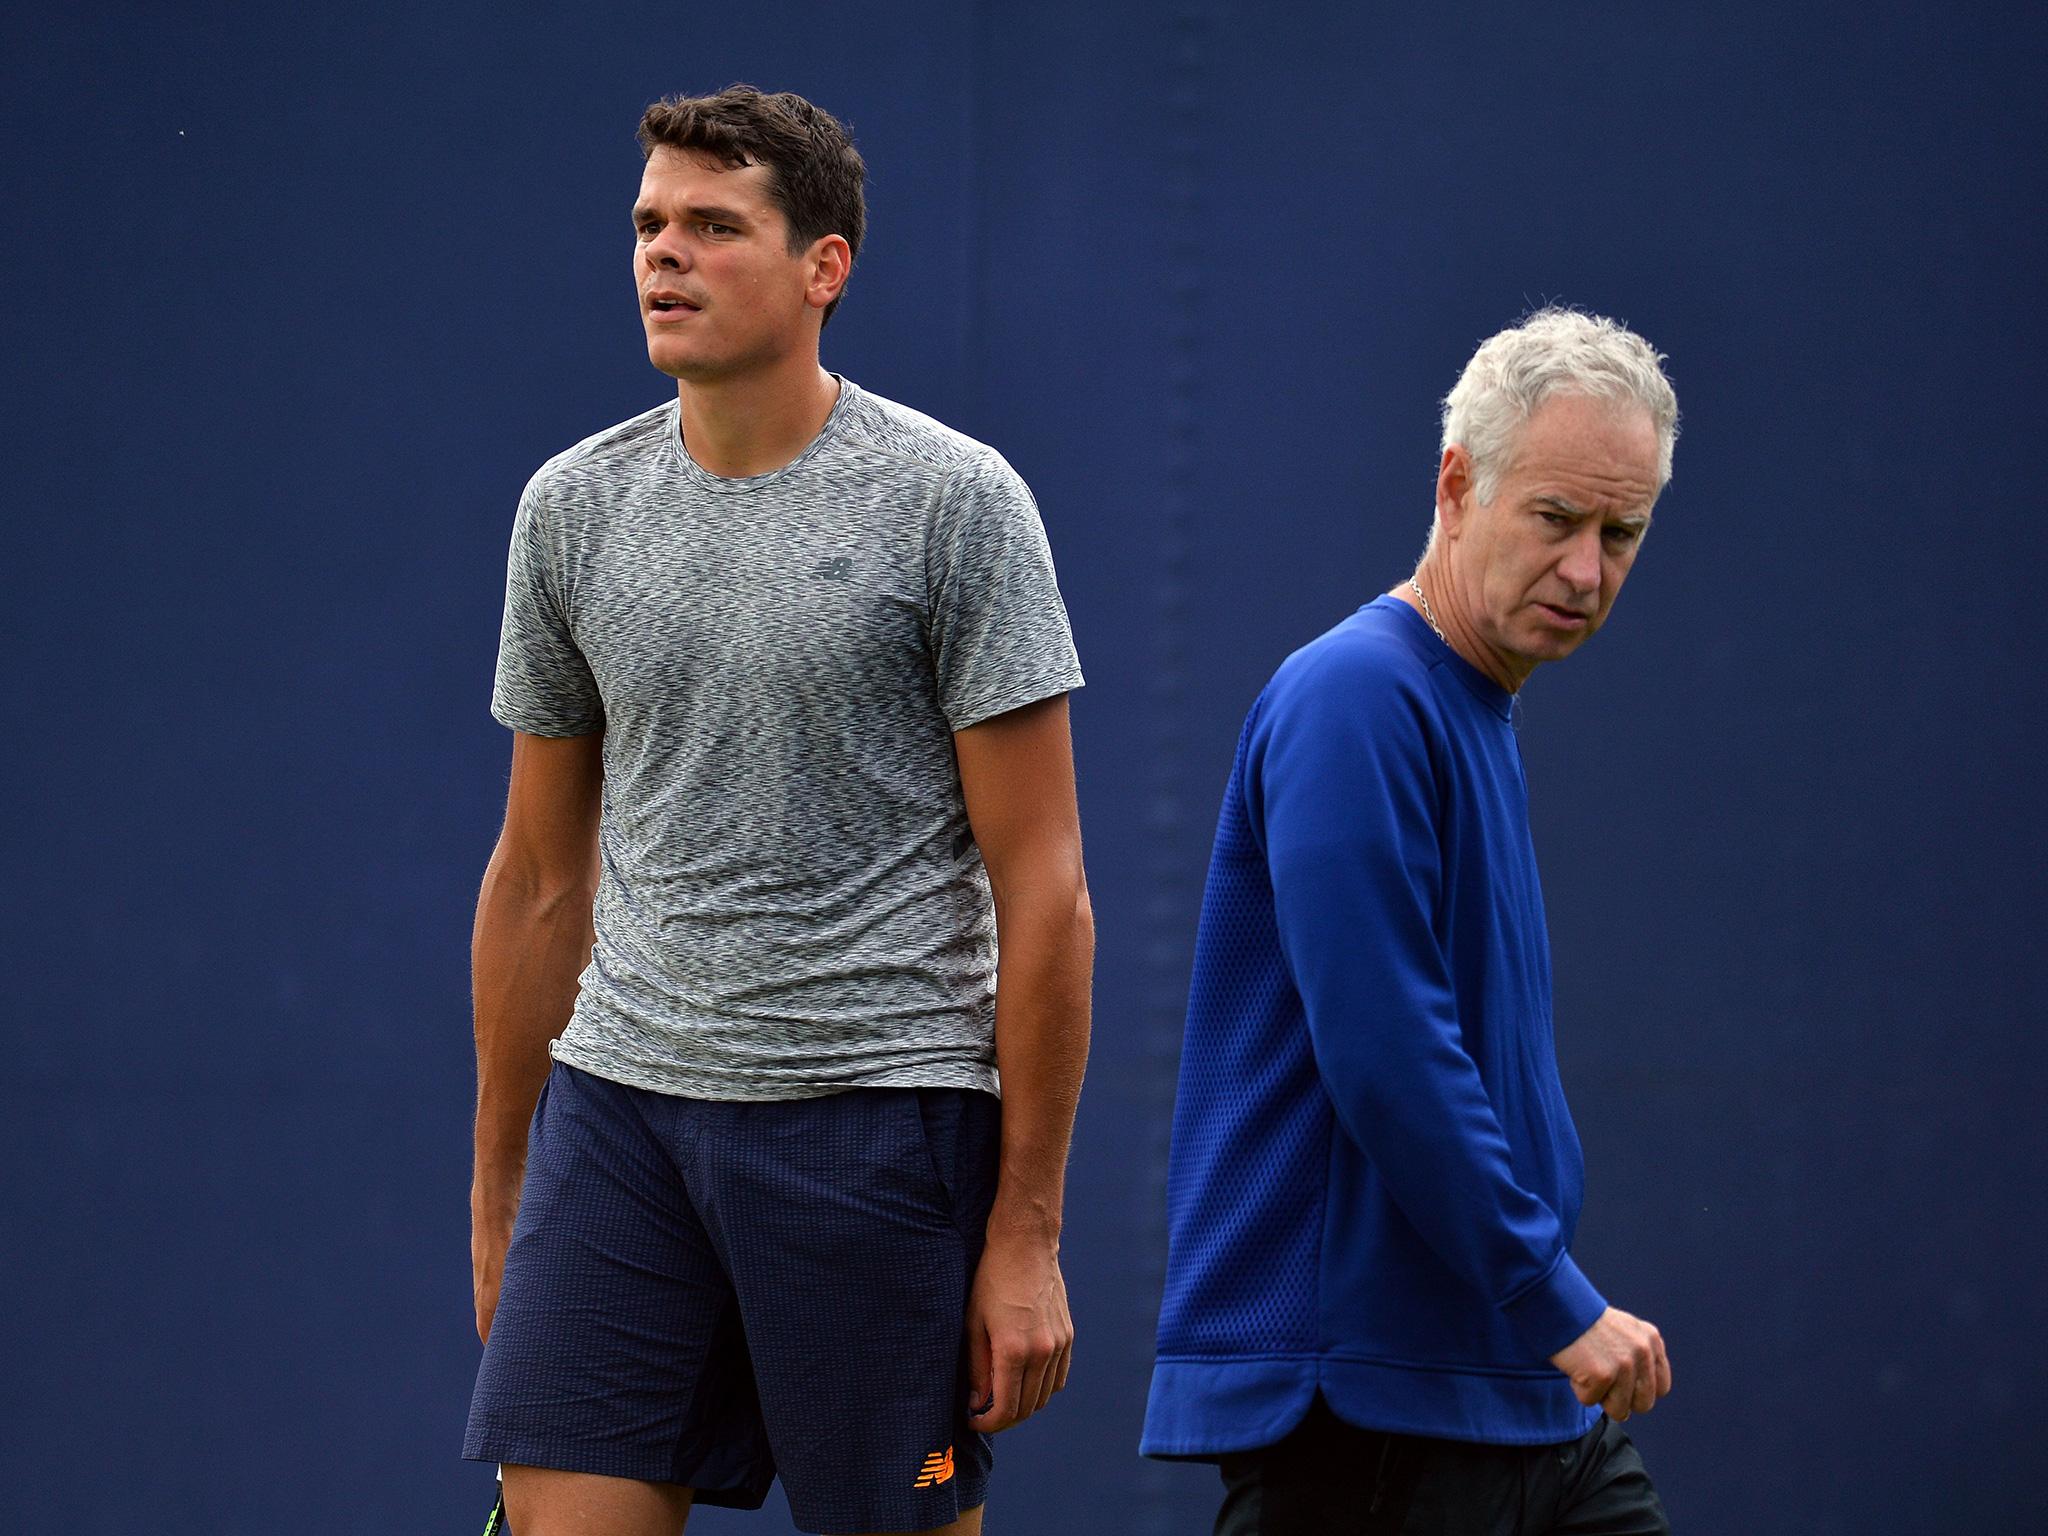 McEnroe coaches Raonic, Murray's opponent for this year's final